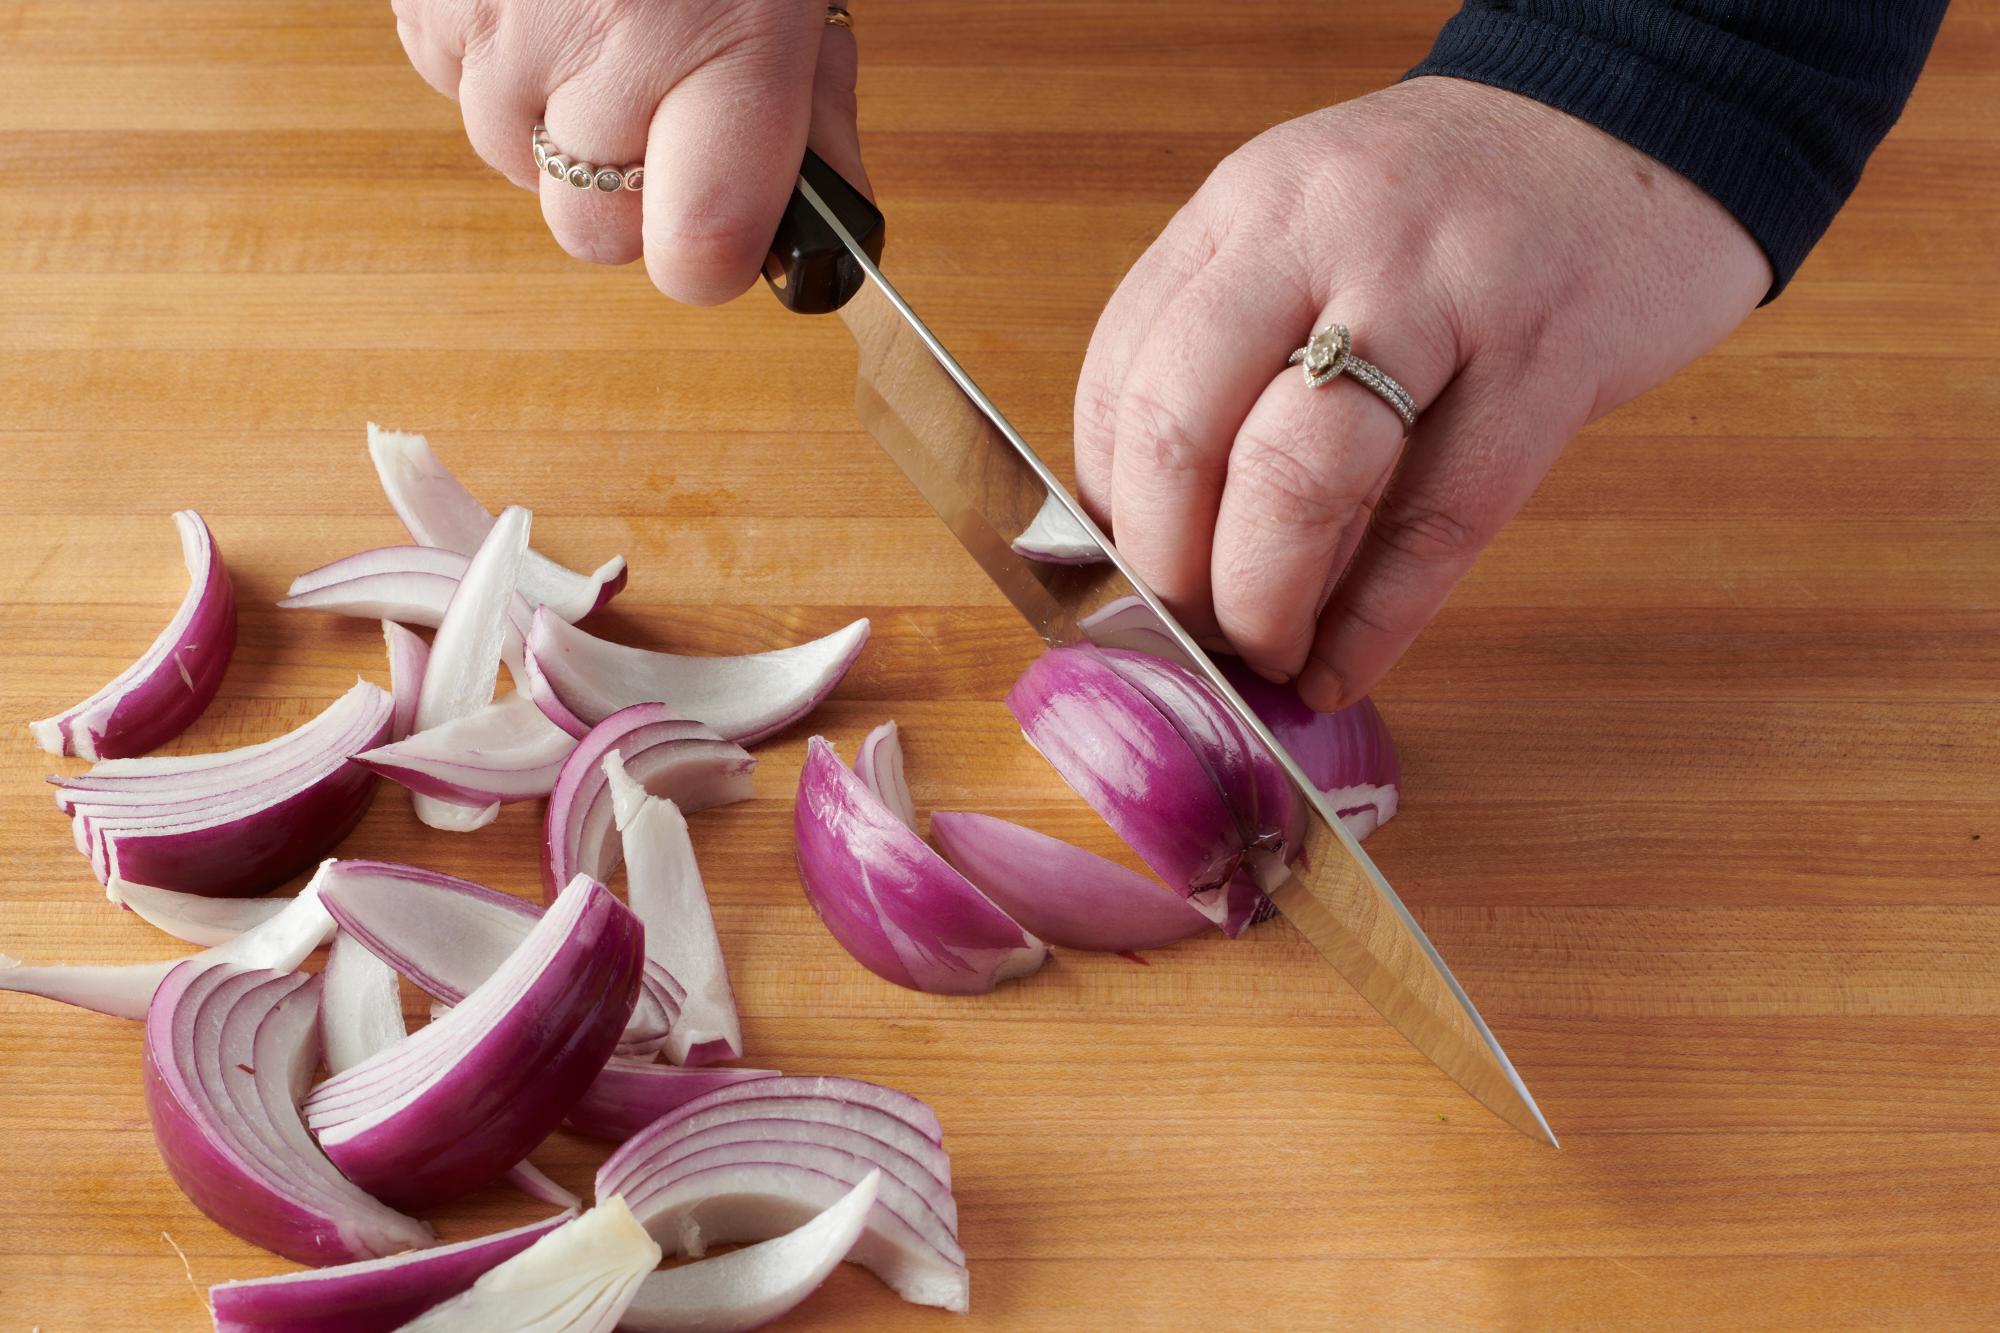 Slicing the red onion with a Petite Chef.